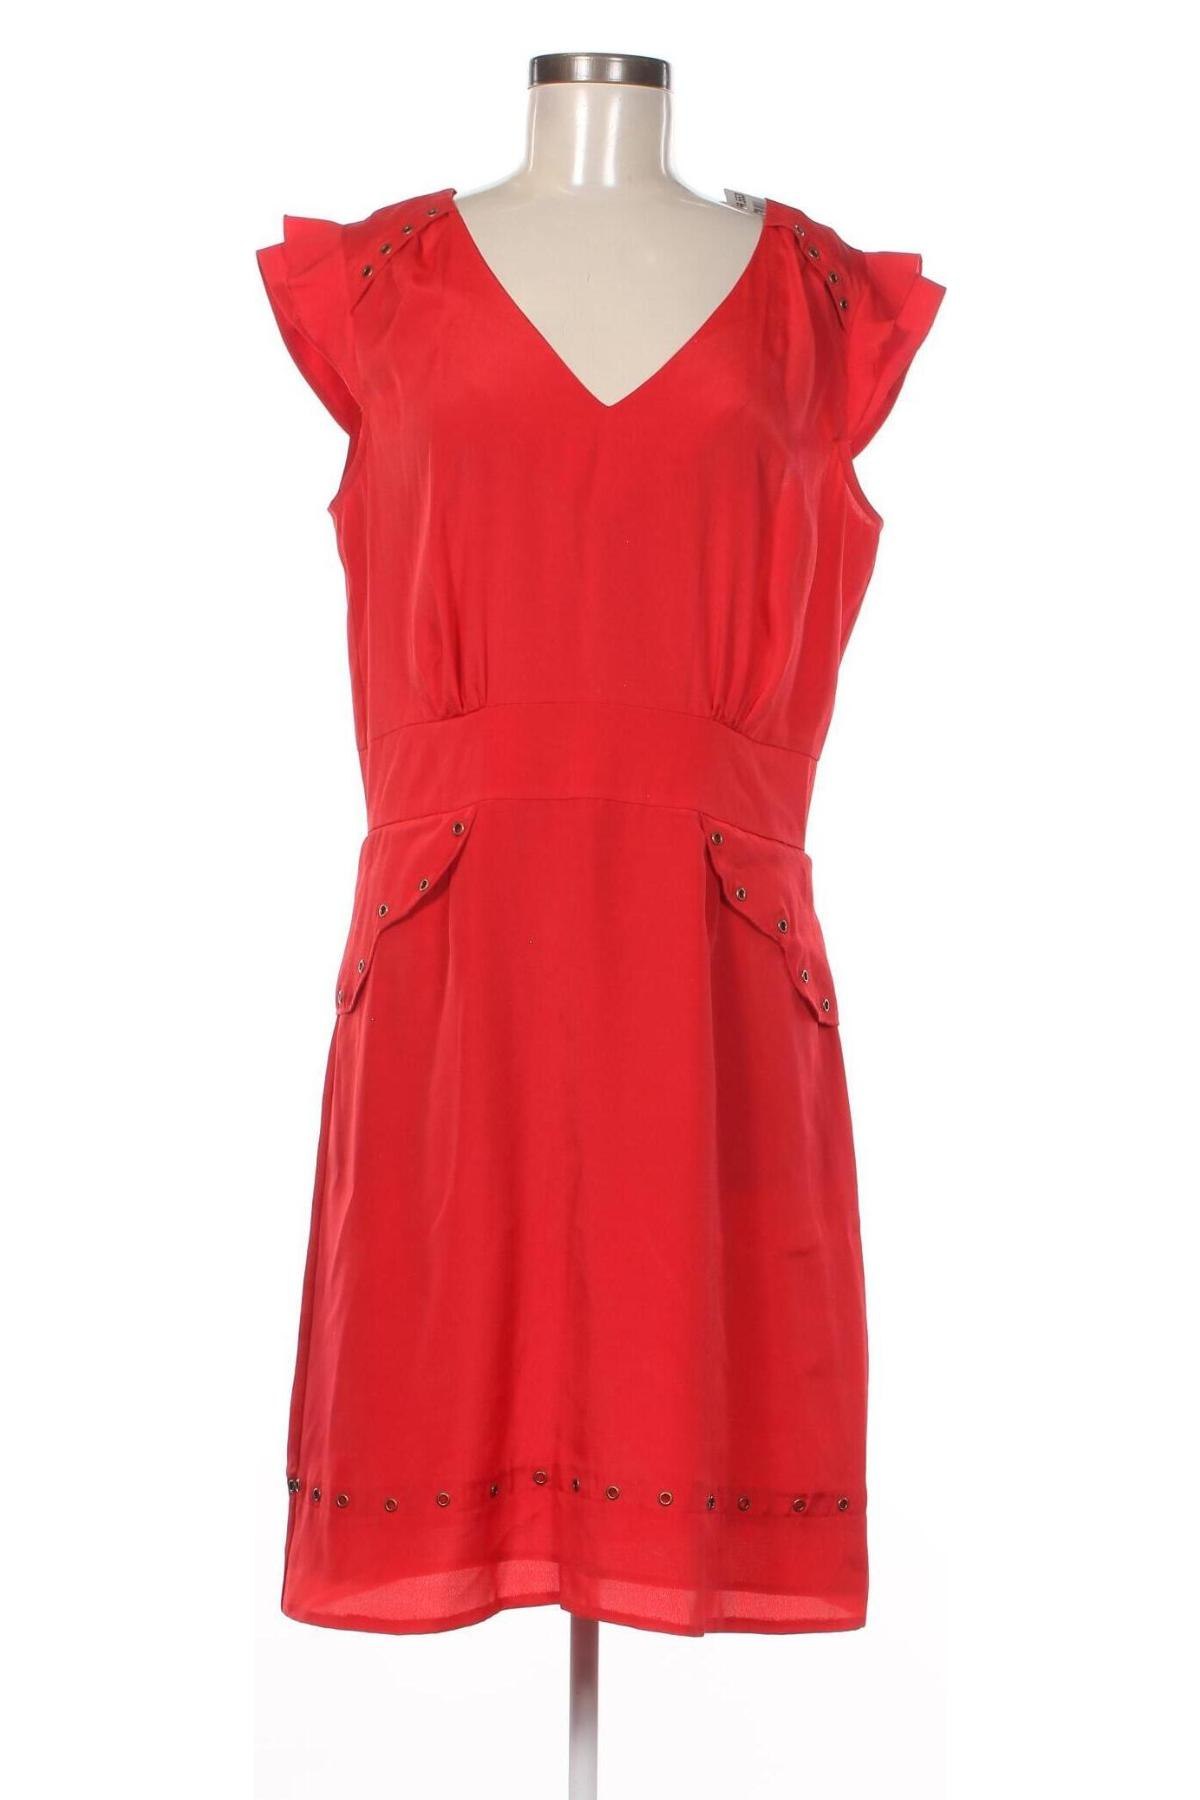 Kleid Limited Collection, Größe L, Farbe Rot, Preis € 8,46